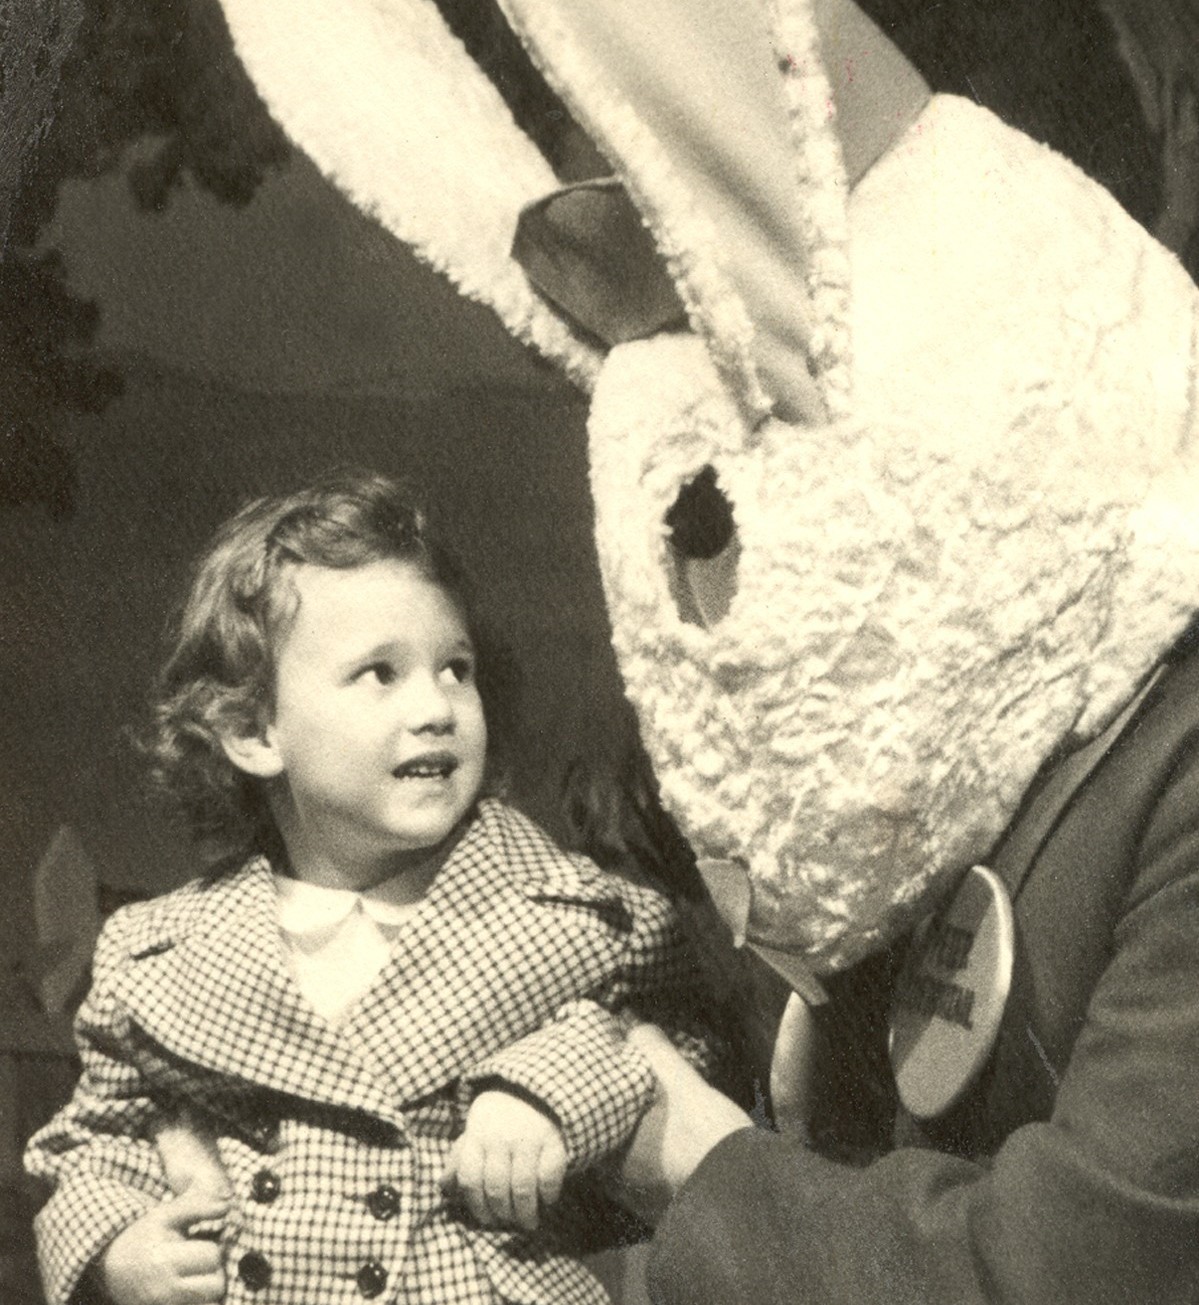 Show Me Detroit Tours owner, Pat Haller, is shown as a child sizing up the Easter Bunny at the iconic (and long-gone) J.L. Hudson Department Store.  